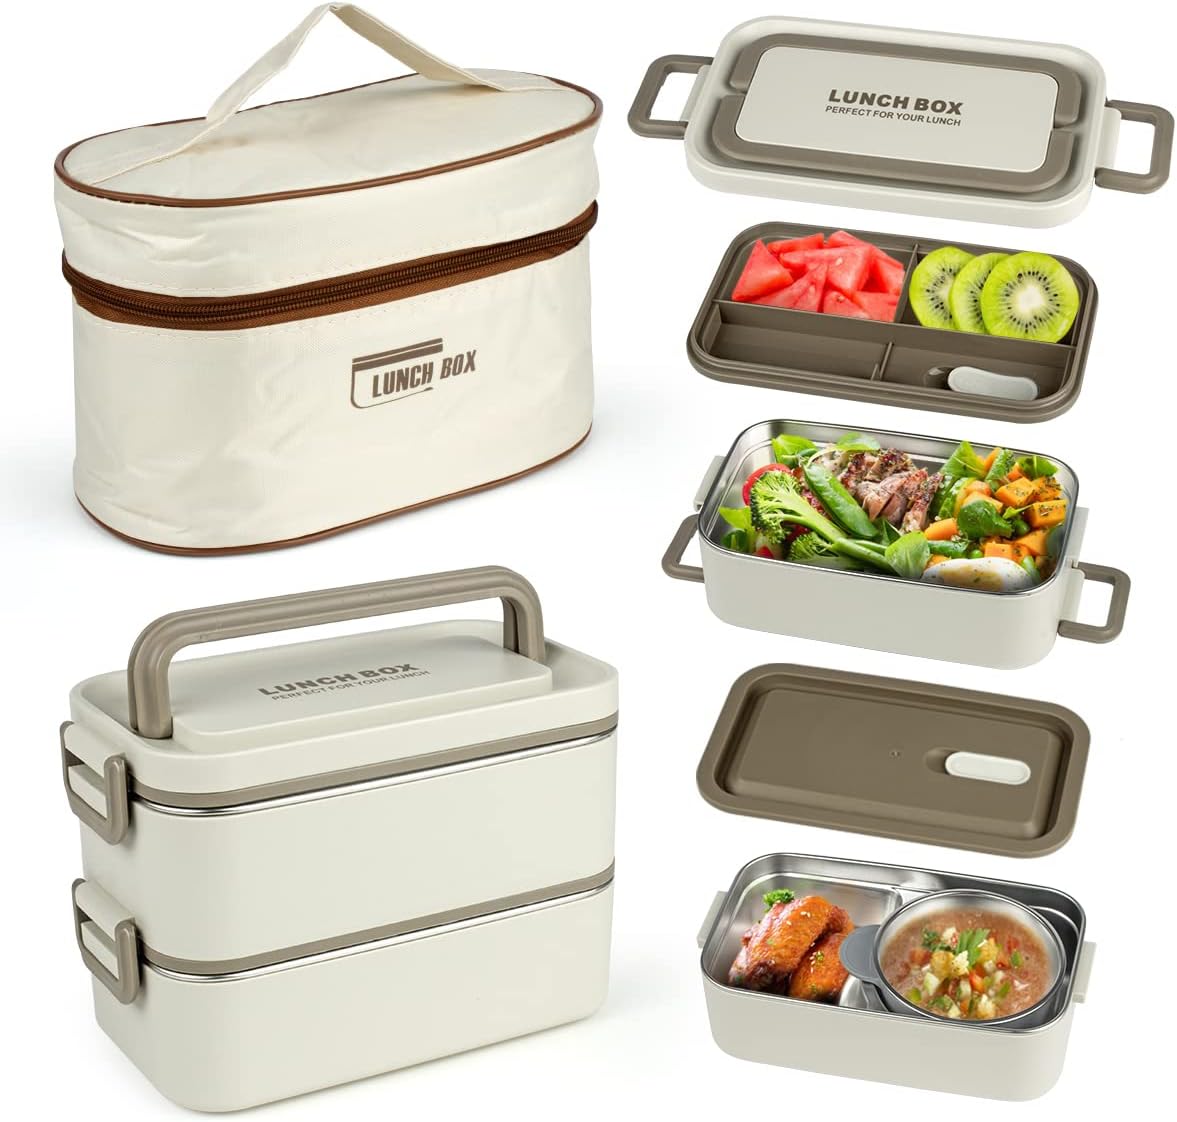 Keweis Bento Box Adult Lunch Box, Portable Insulated [...]